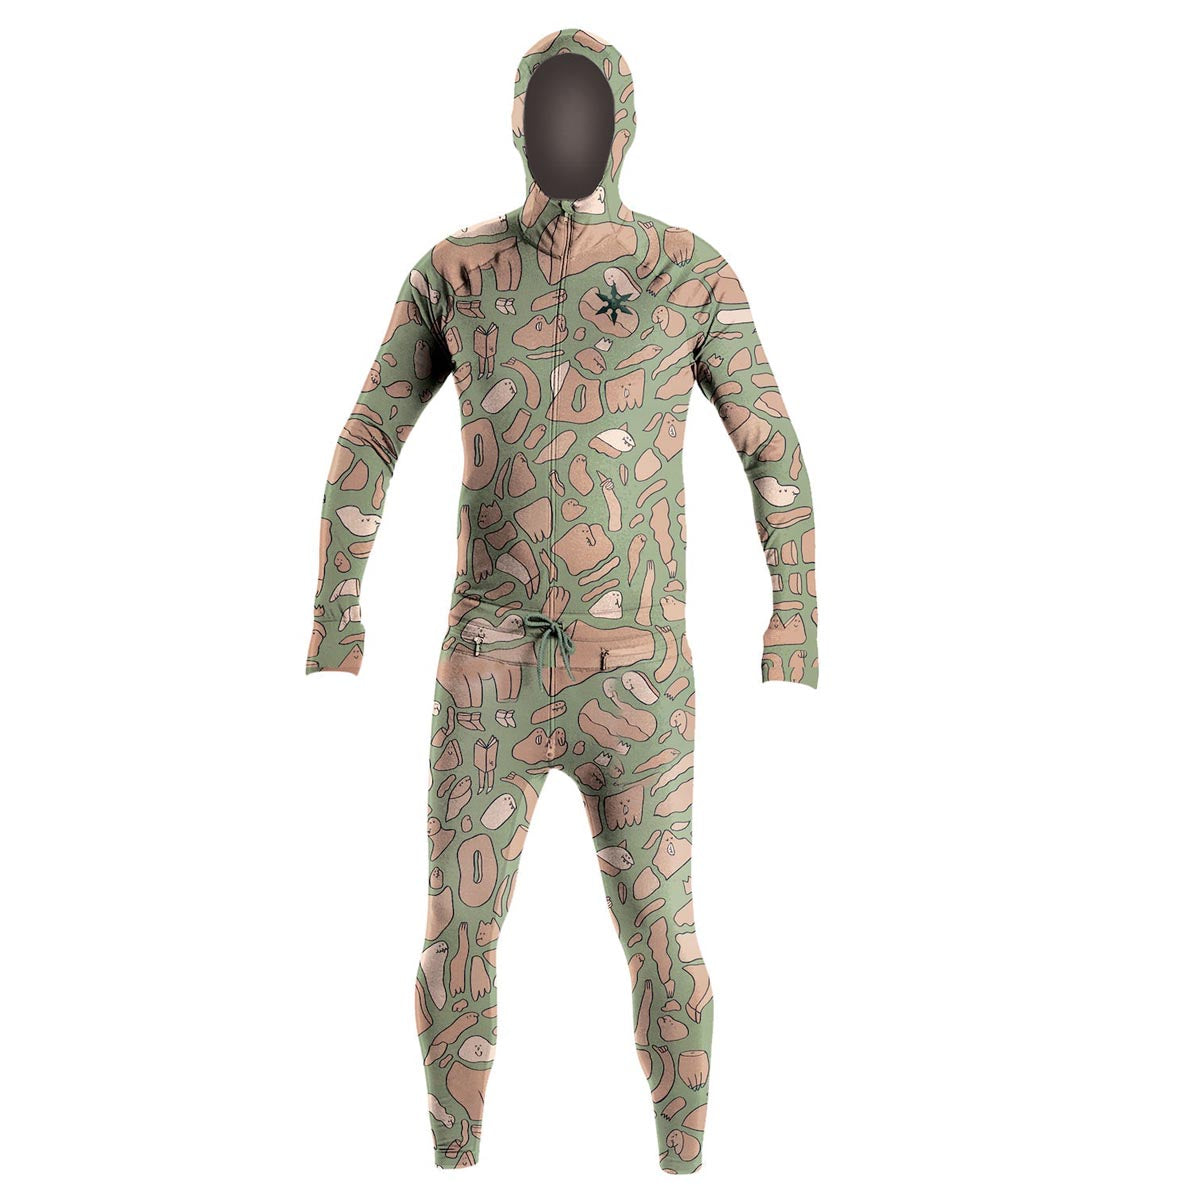 Airblaster Classic Ninja Suit 2024 Snowboard Base Layer - Bc Green Critterflage image 1